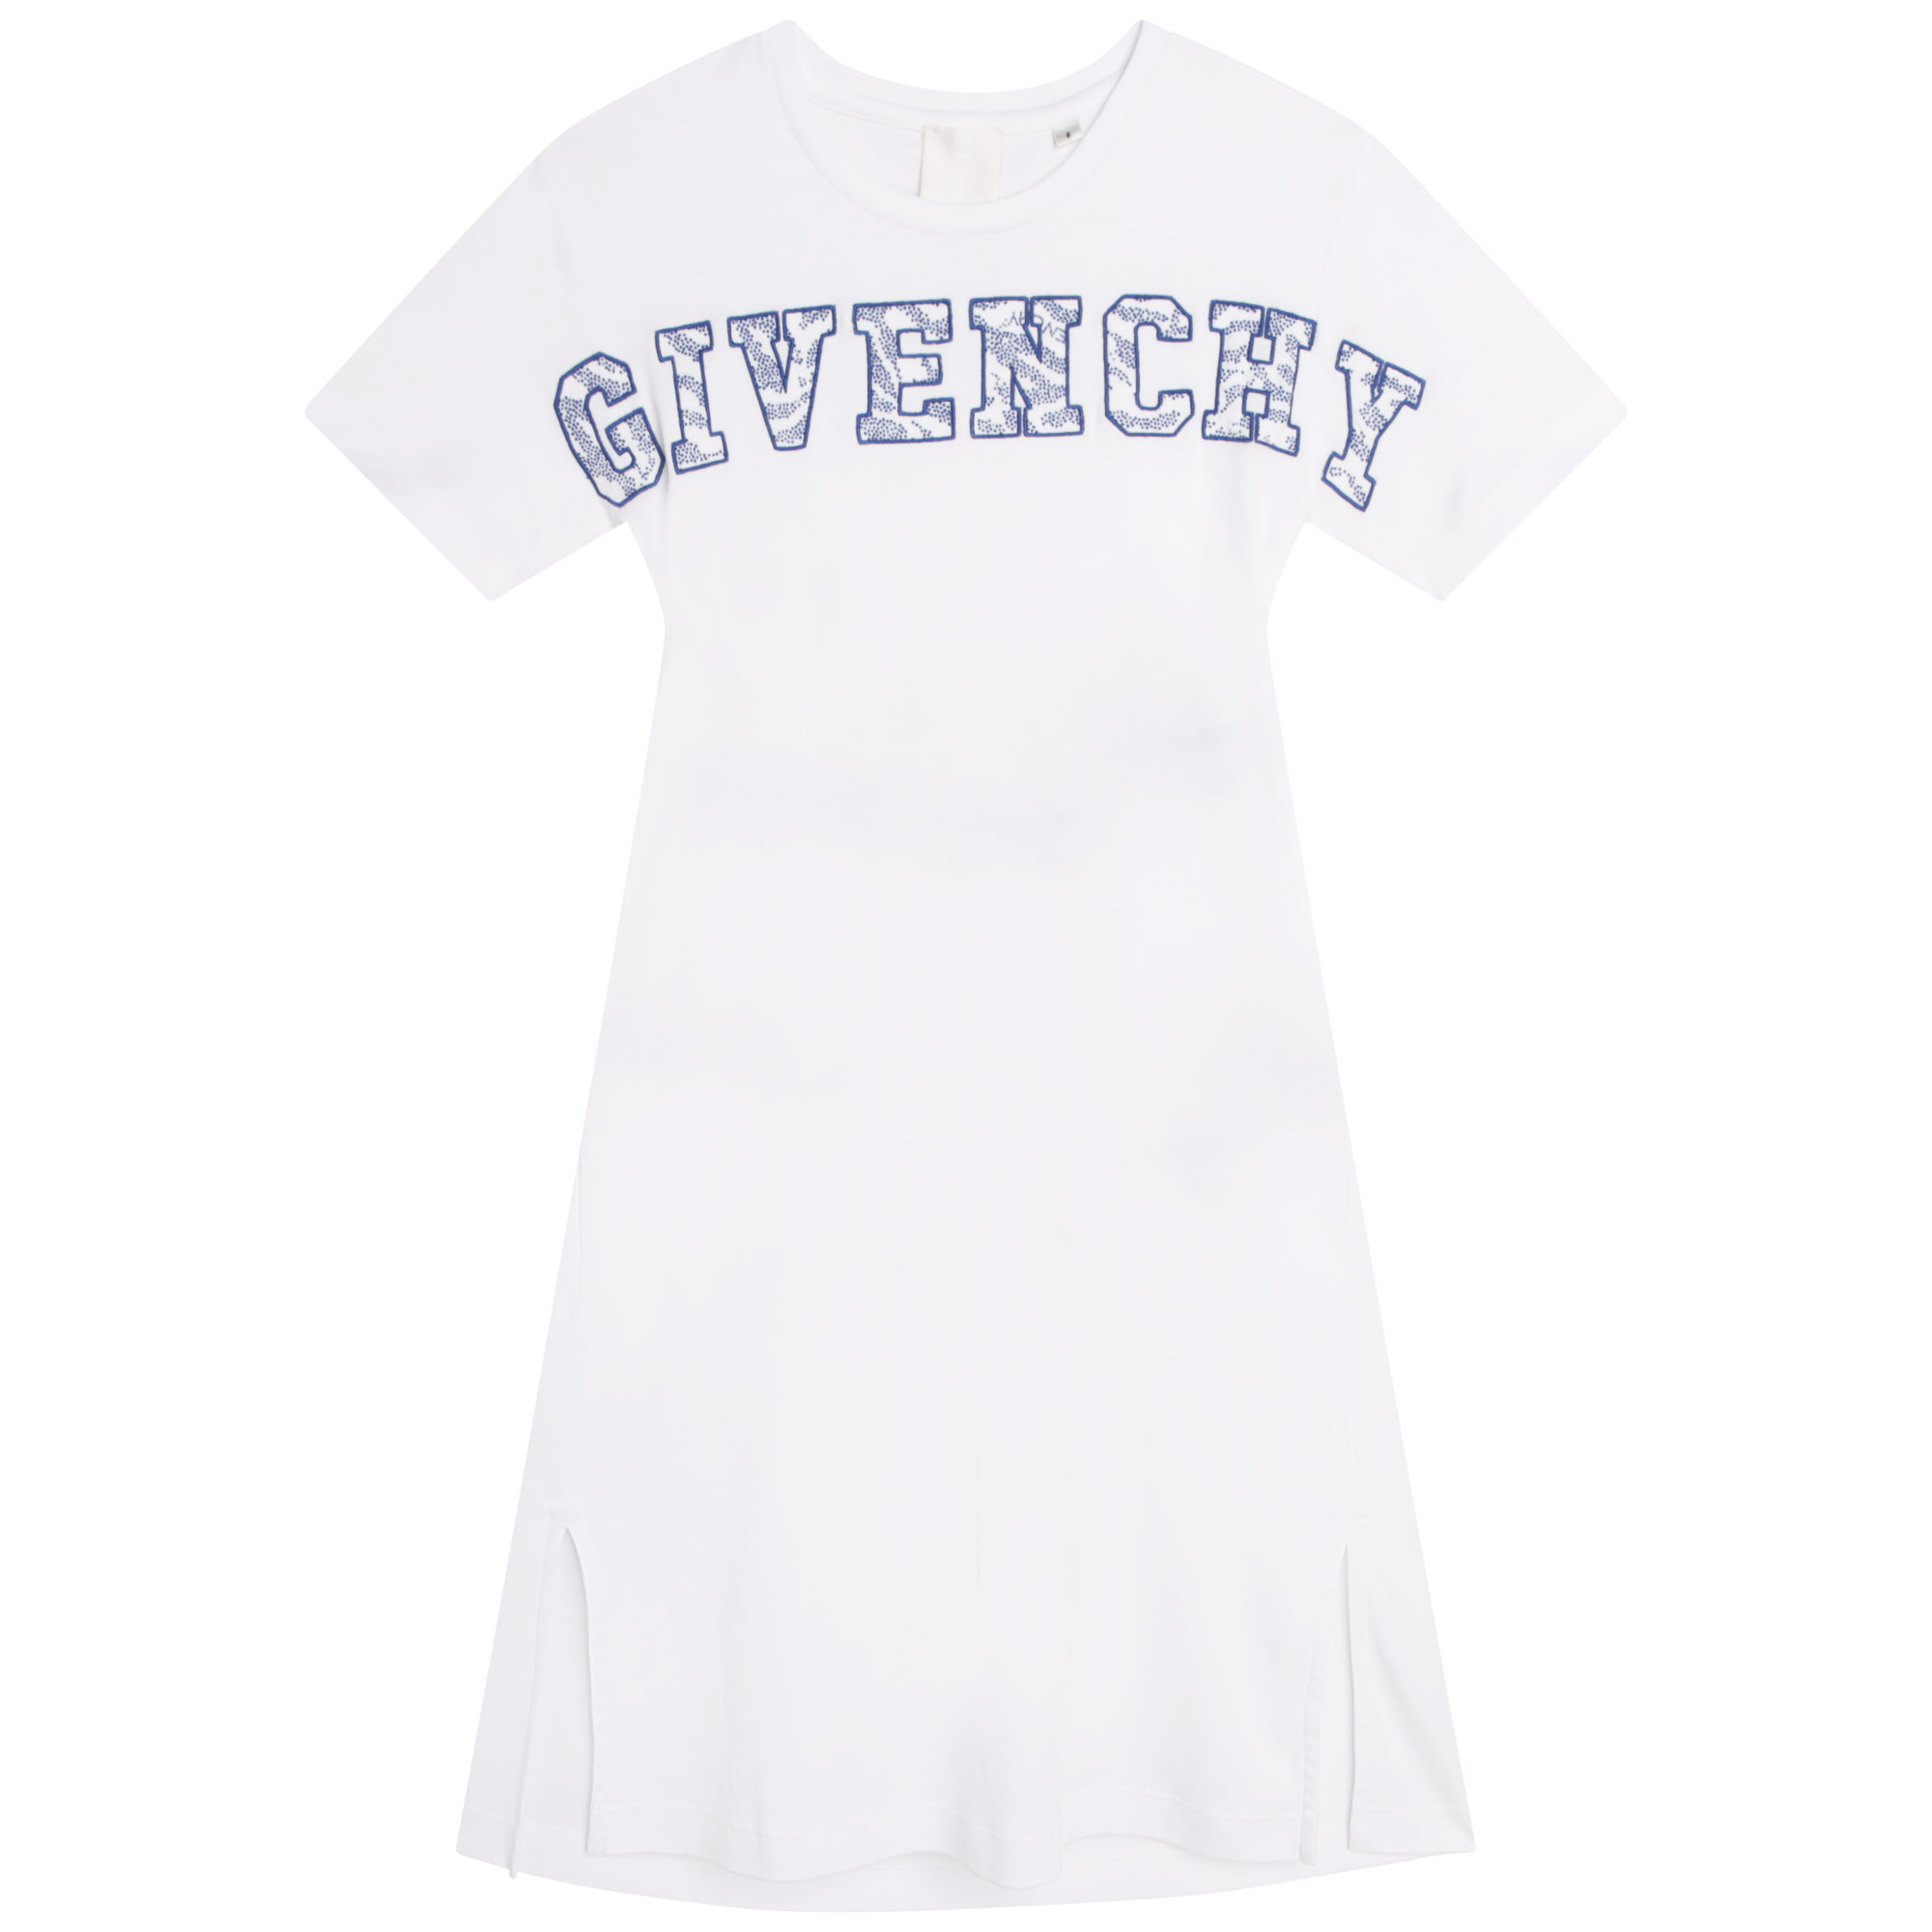 JURK CM GIVENCHY Voor